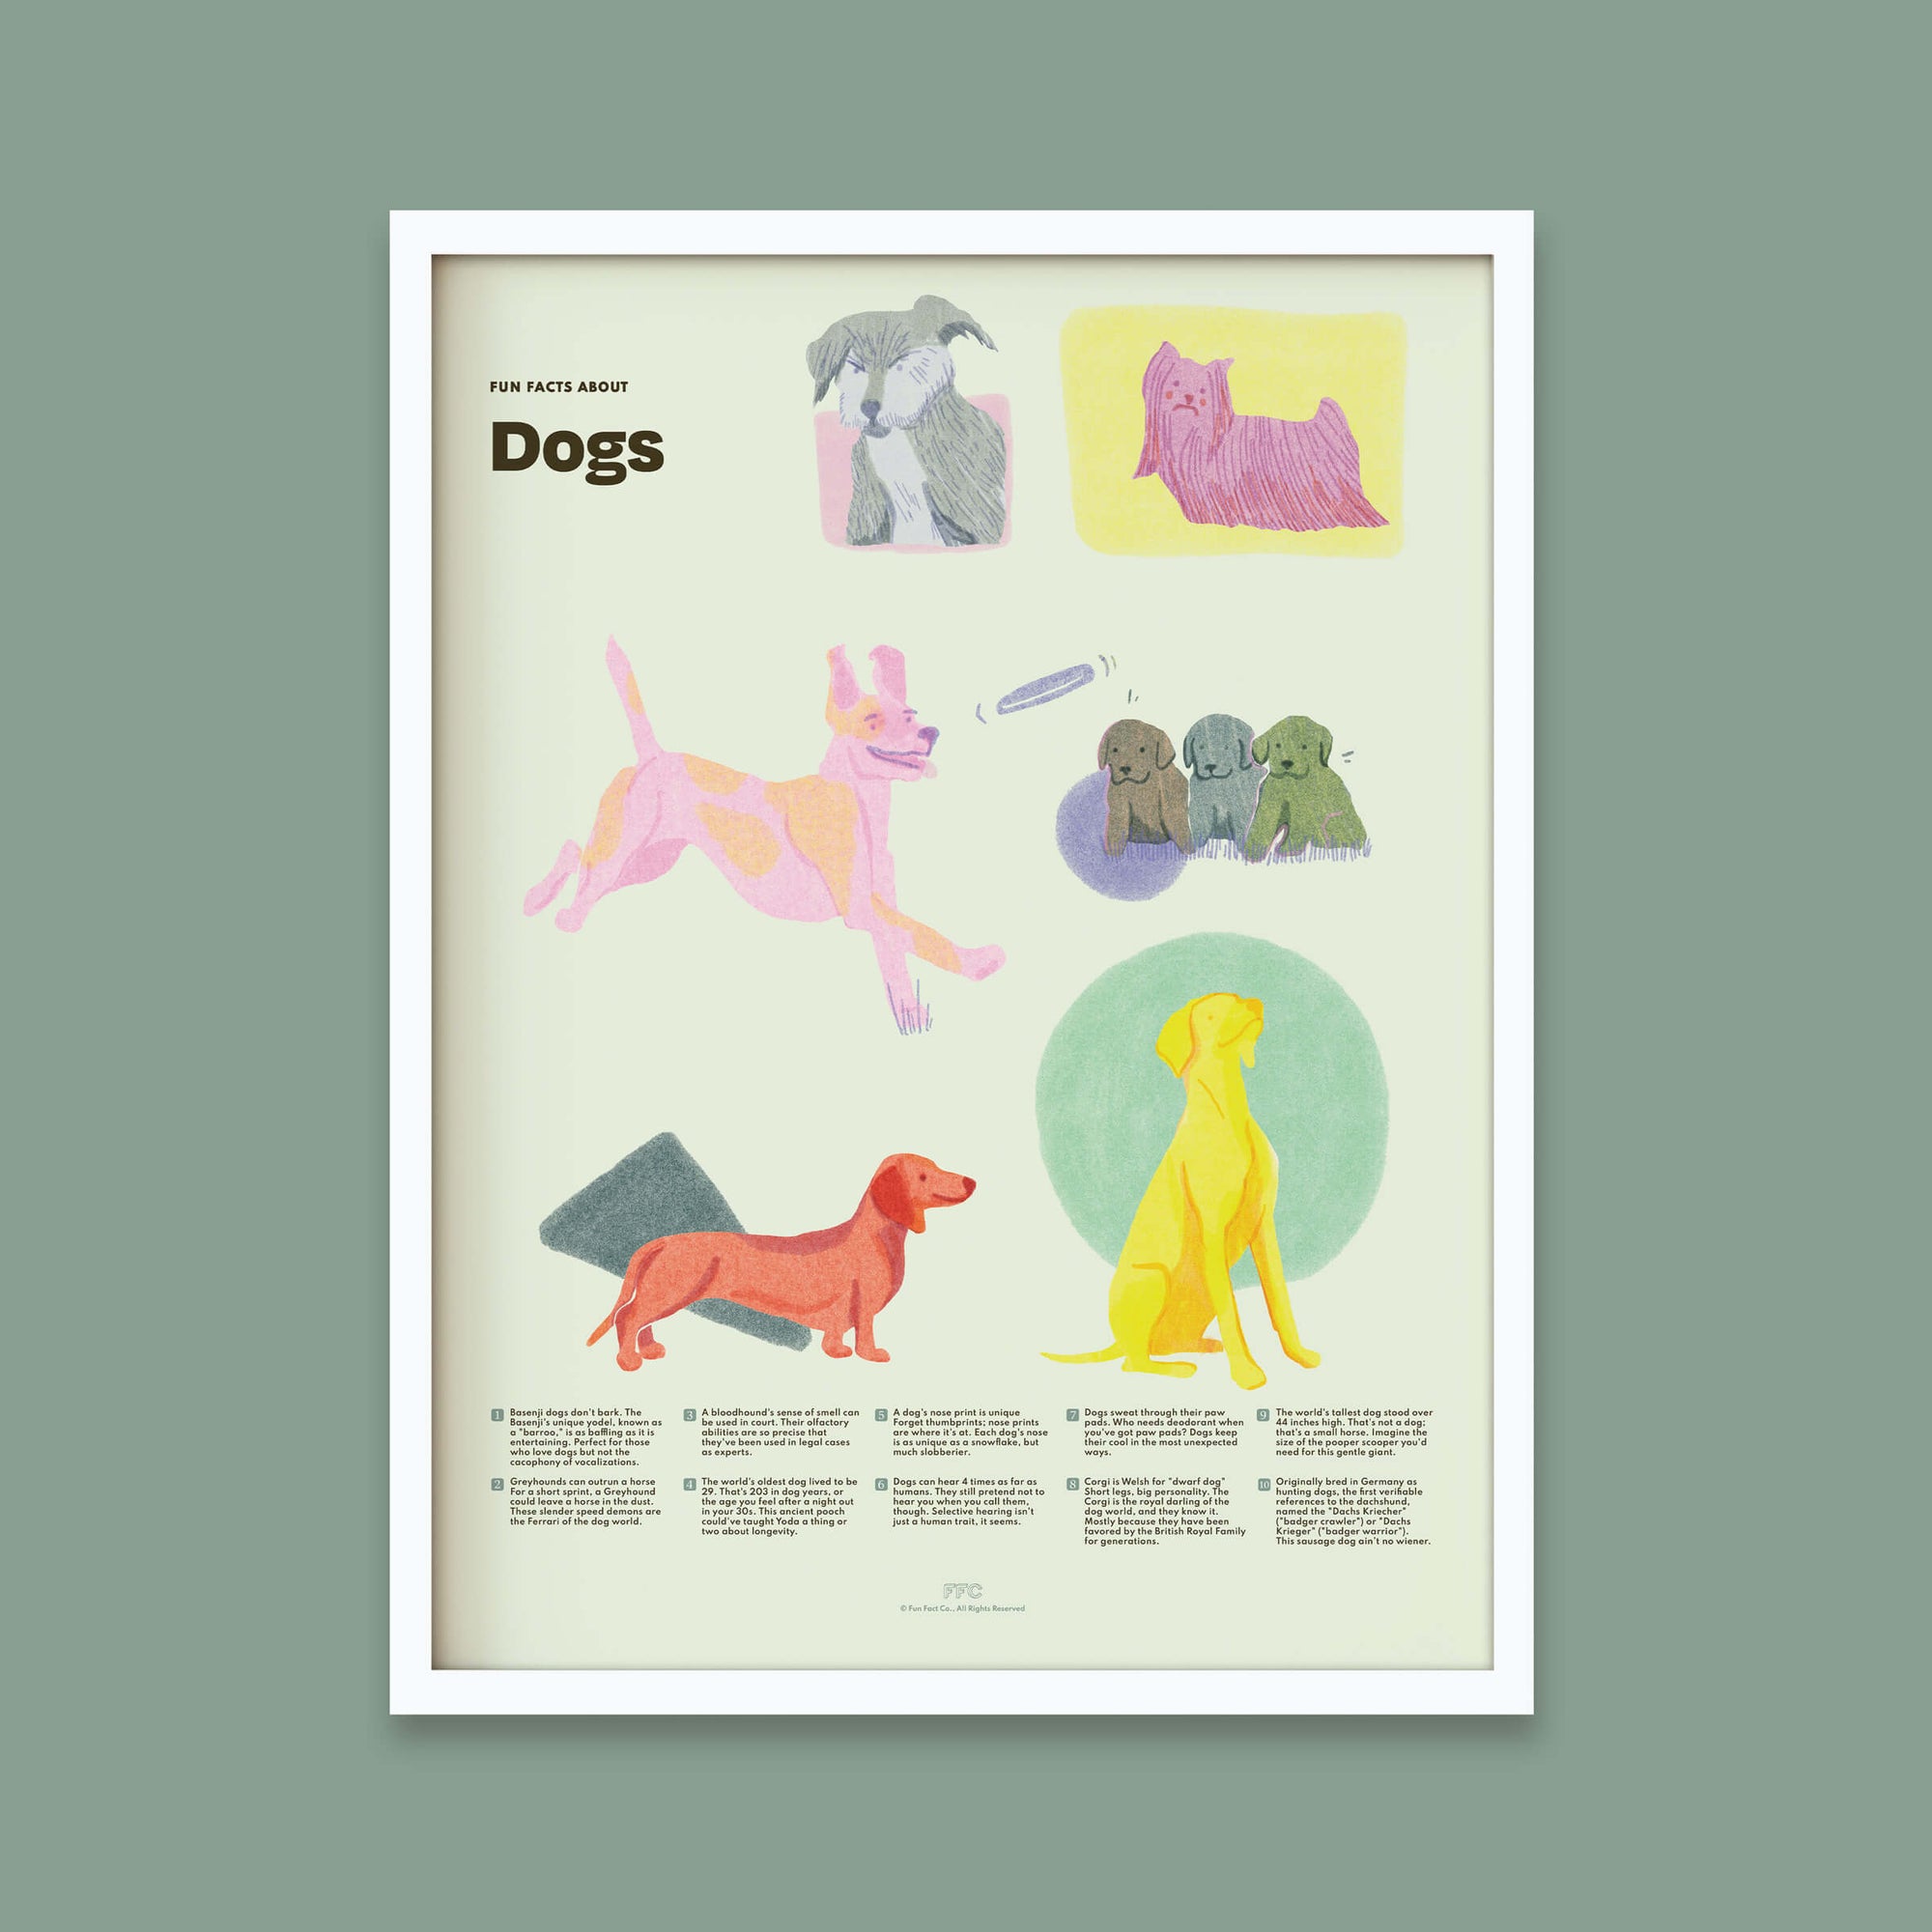 Dog Fun Facts Print, Educational Dog Poster by Fun Fact Co. - White Frame